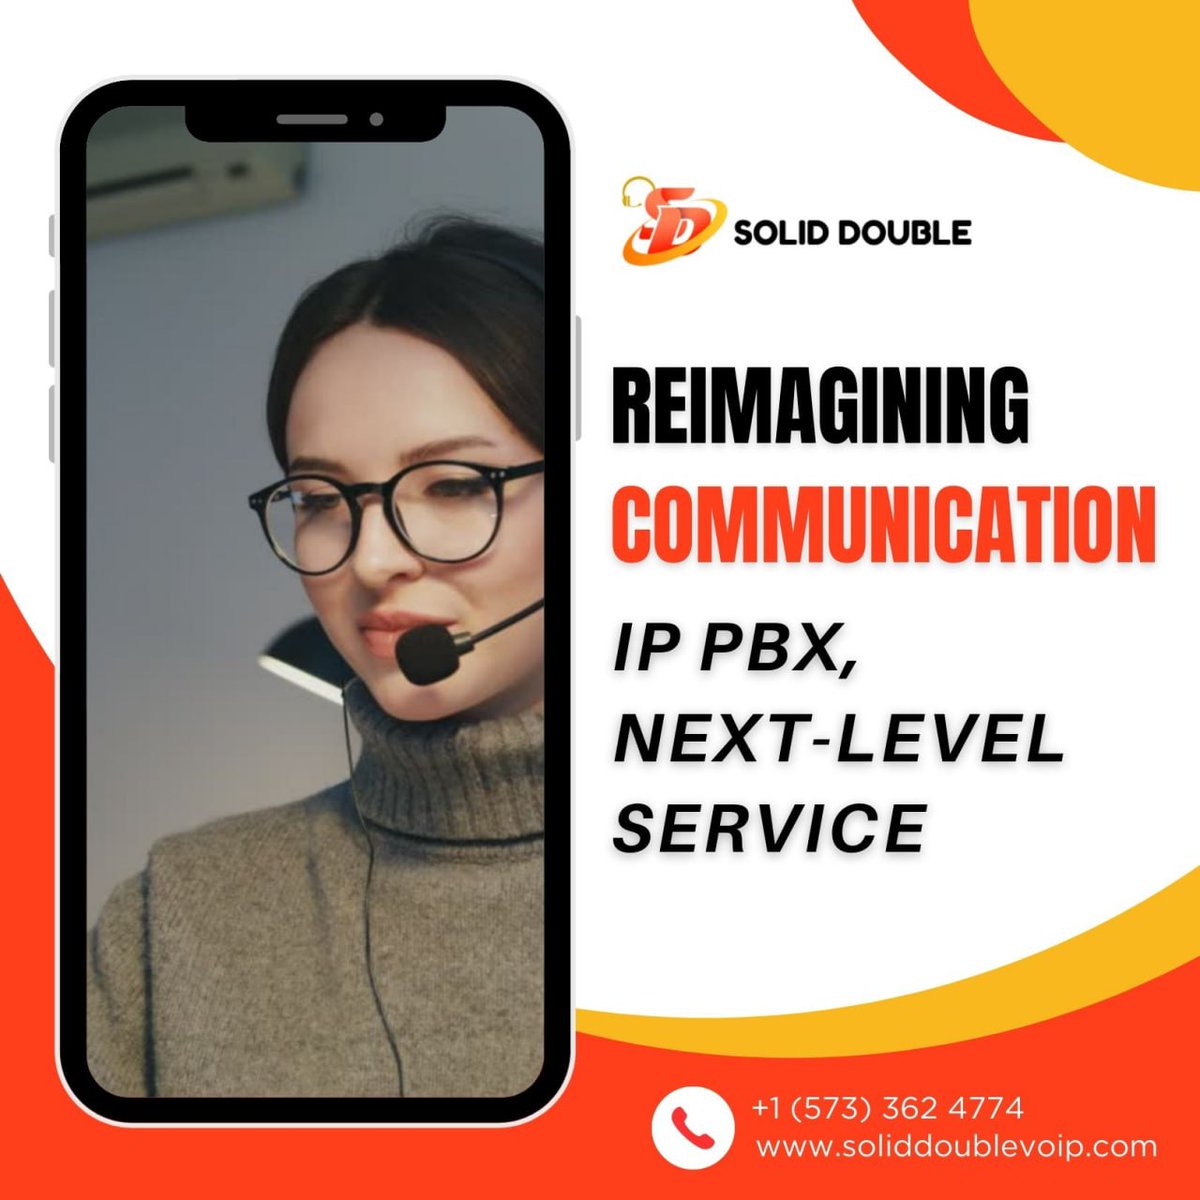 Say hello to crystal-clear conversations and wave goodbye to old telephony systems! Our IP PBX phone system is here to revolutionize your business communication. #IPPBX #CommunicationRevolution #BusinessUpgrade